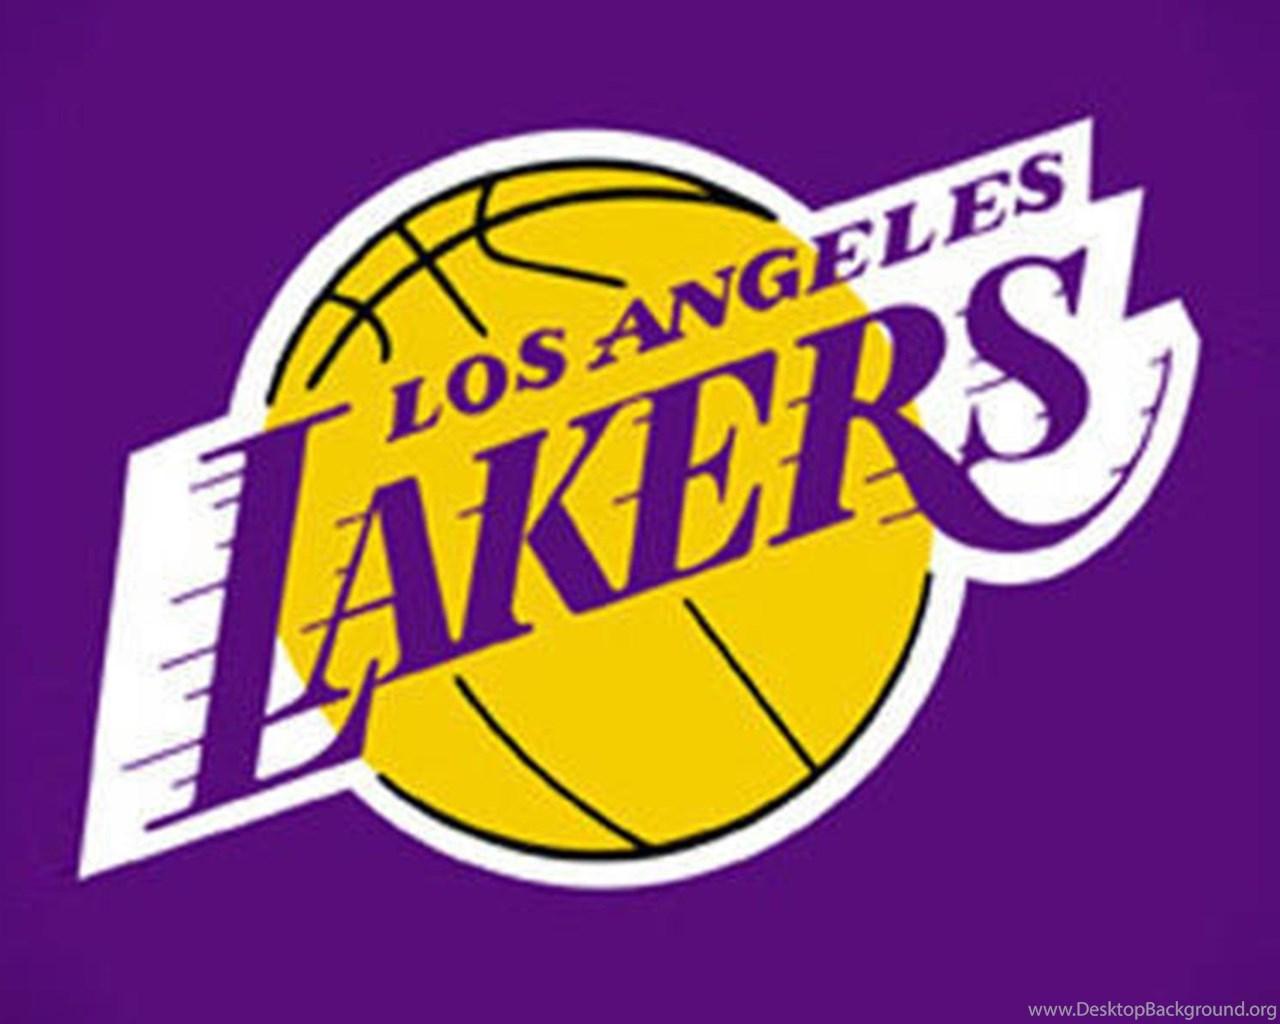 Los Angeles Lakers Wallpapers - Wallpaper Cave